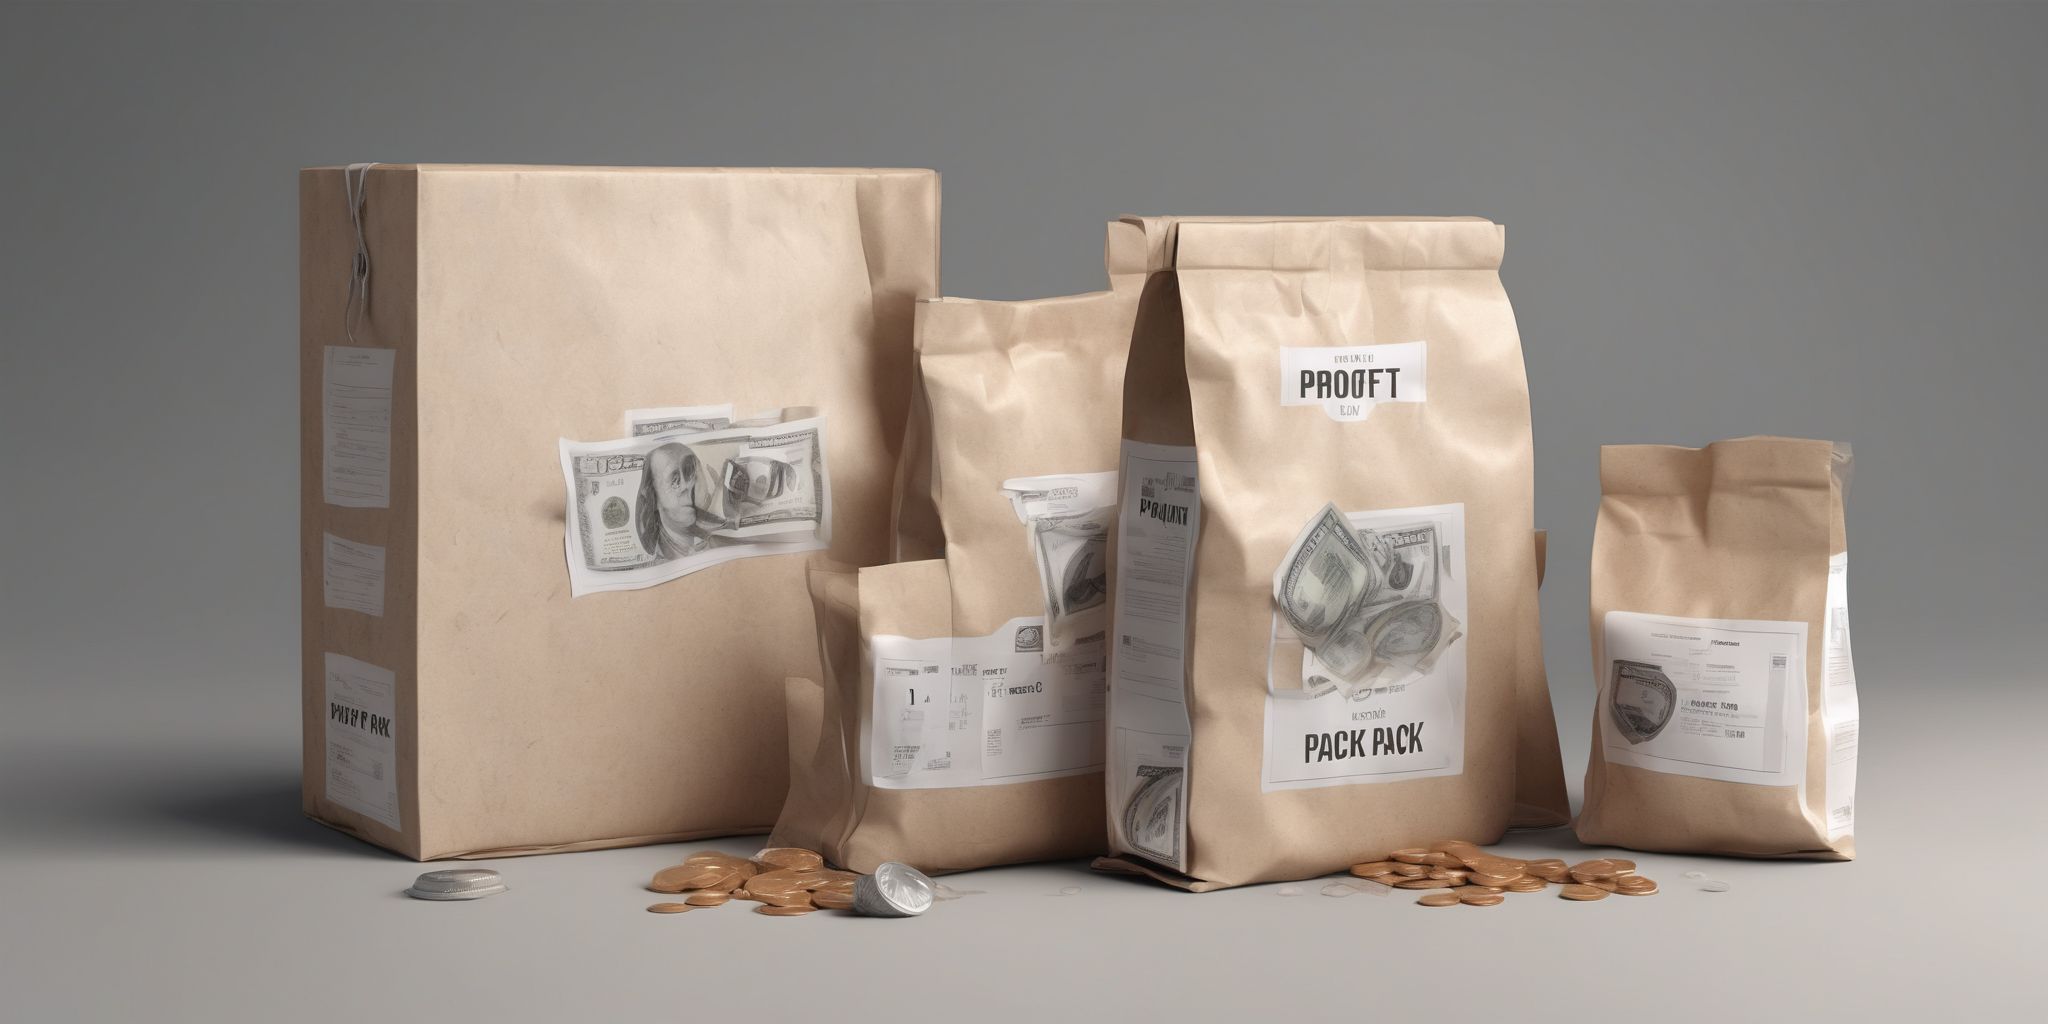 Profit pack  in realistic, photographic style